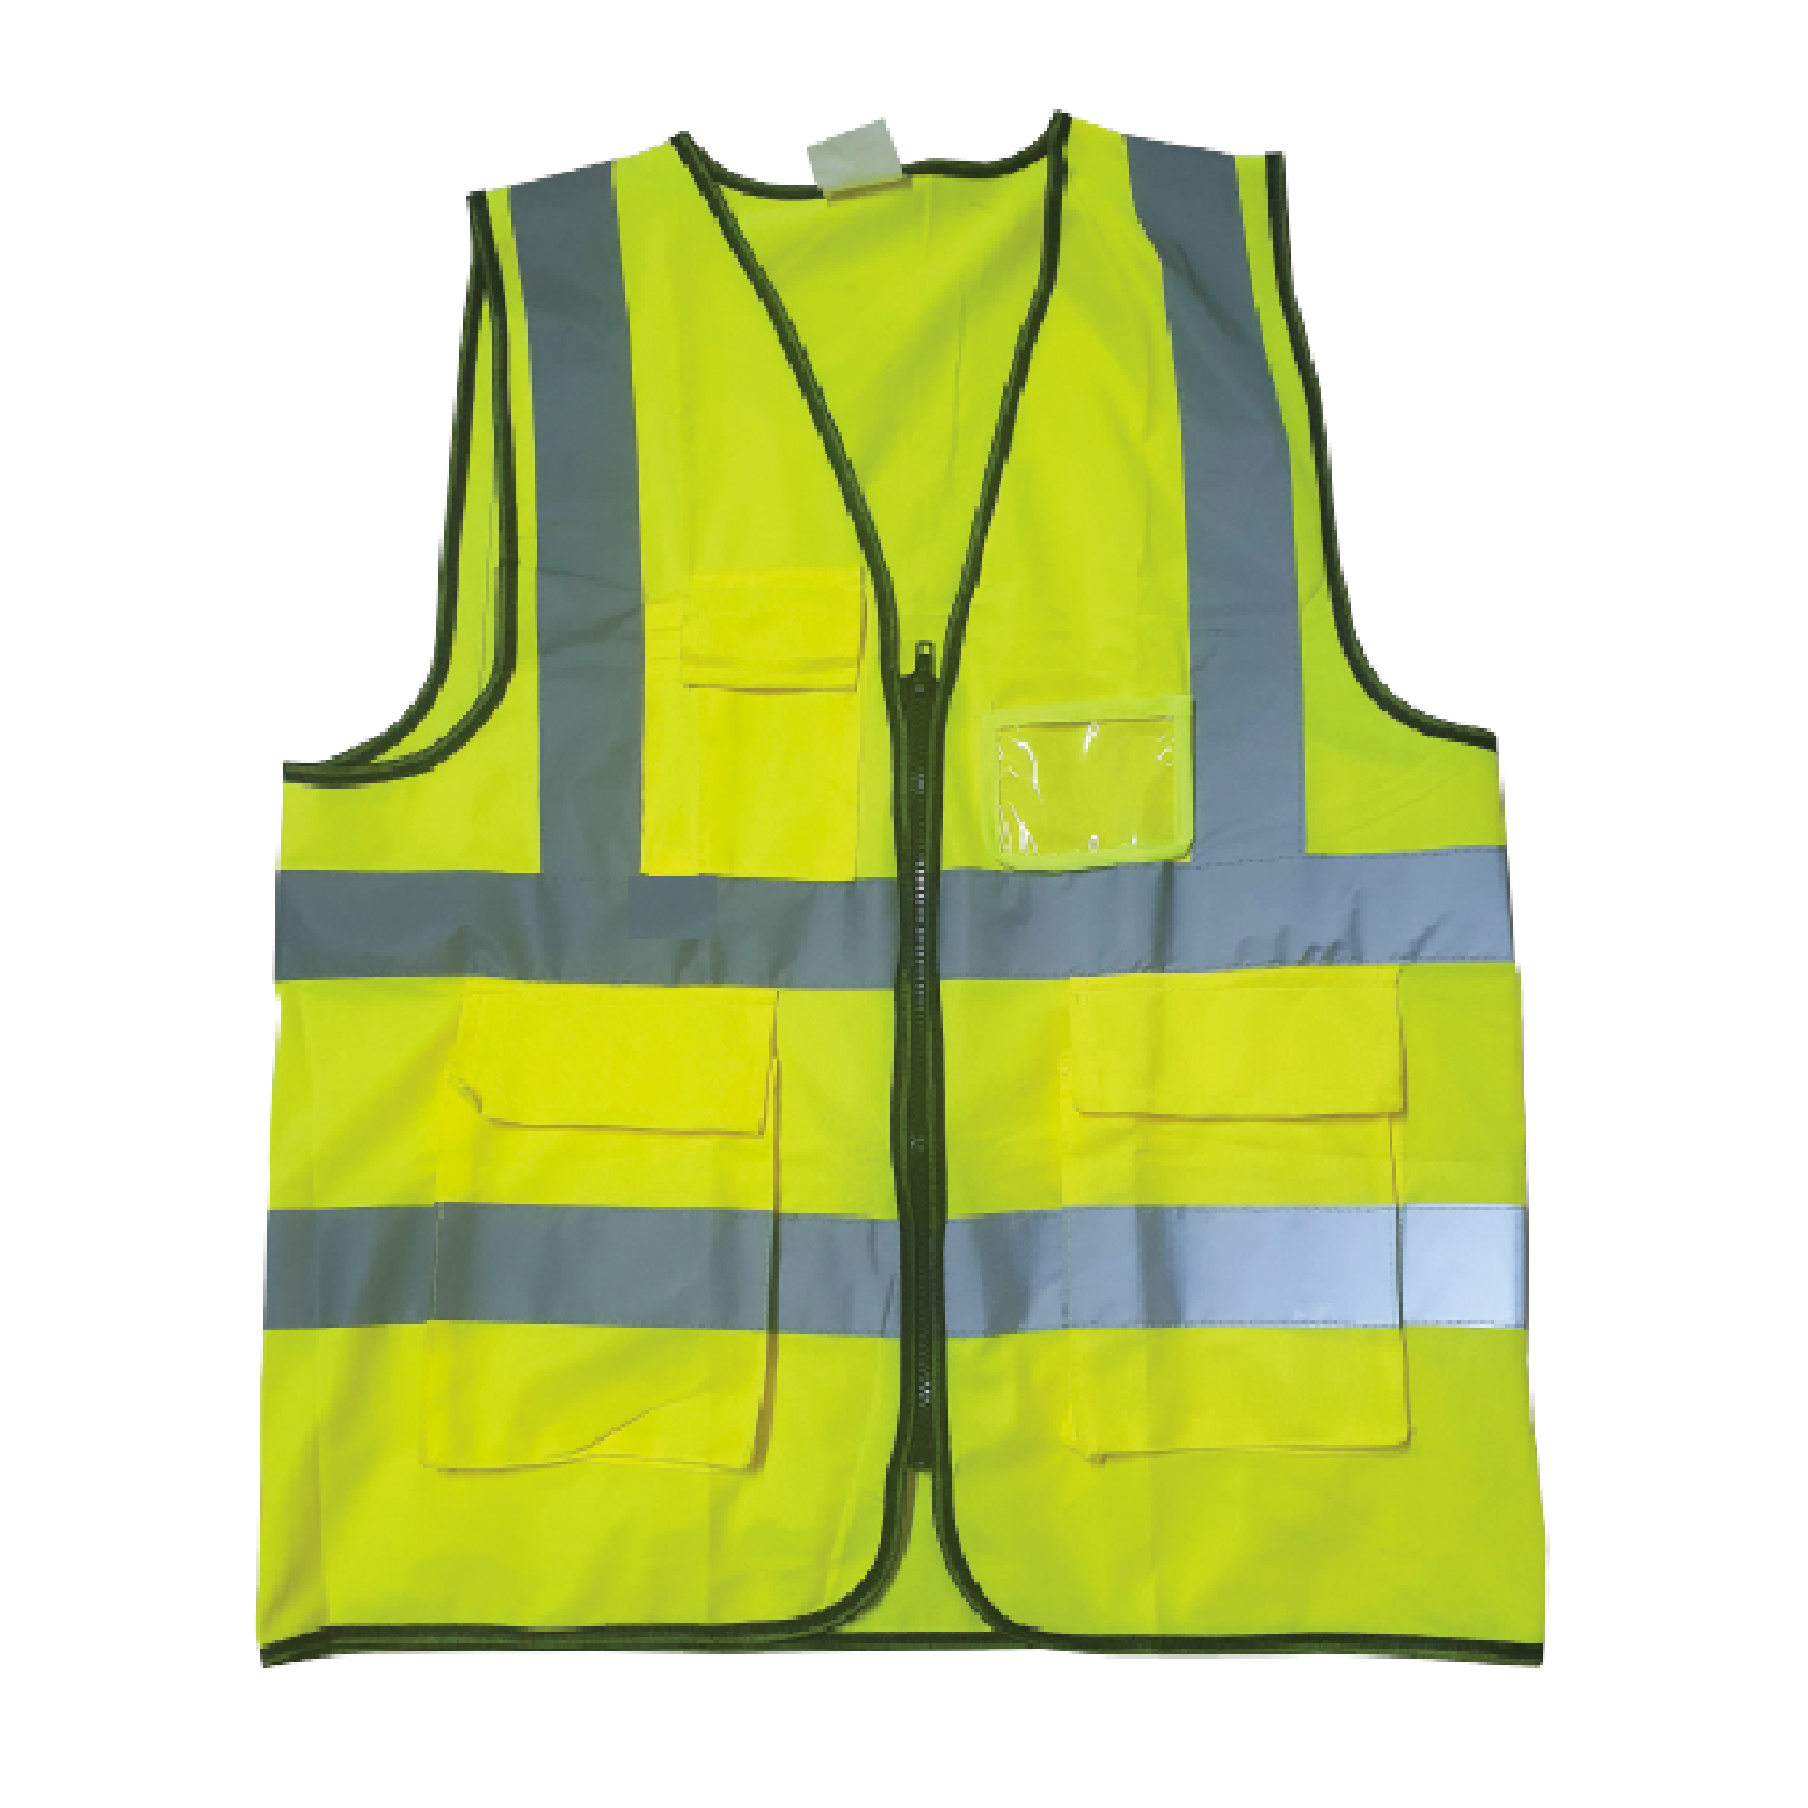 Reflective Yellow Safety Vest With Pockets